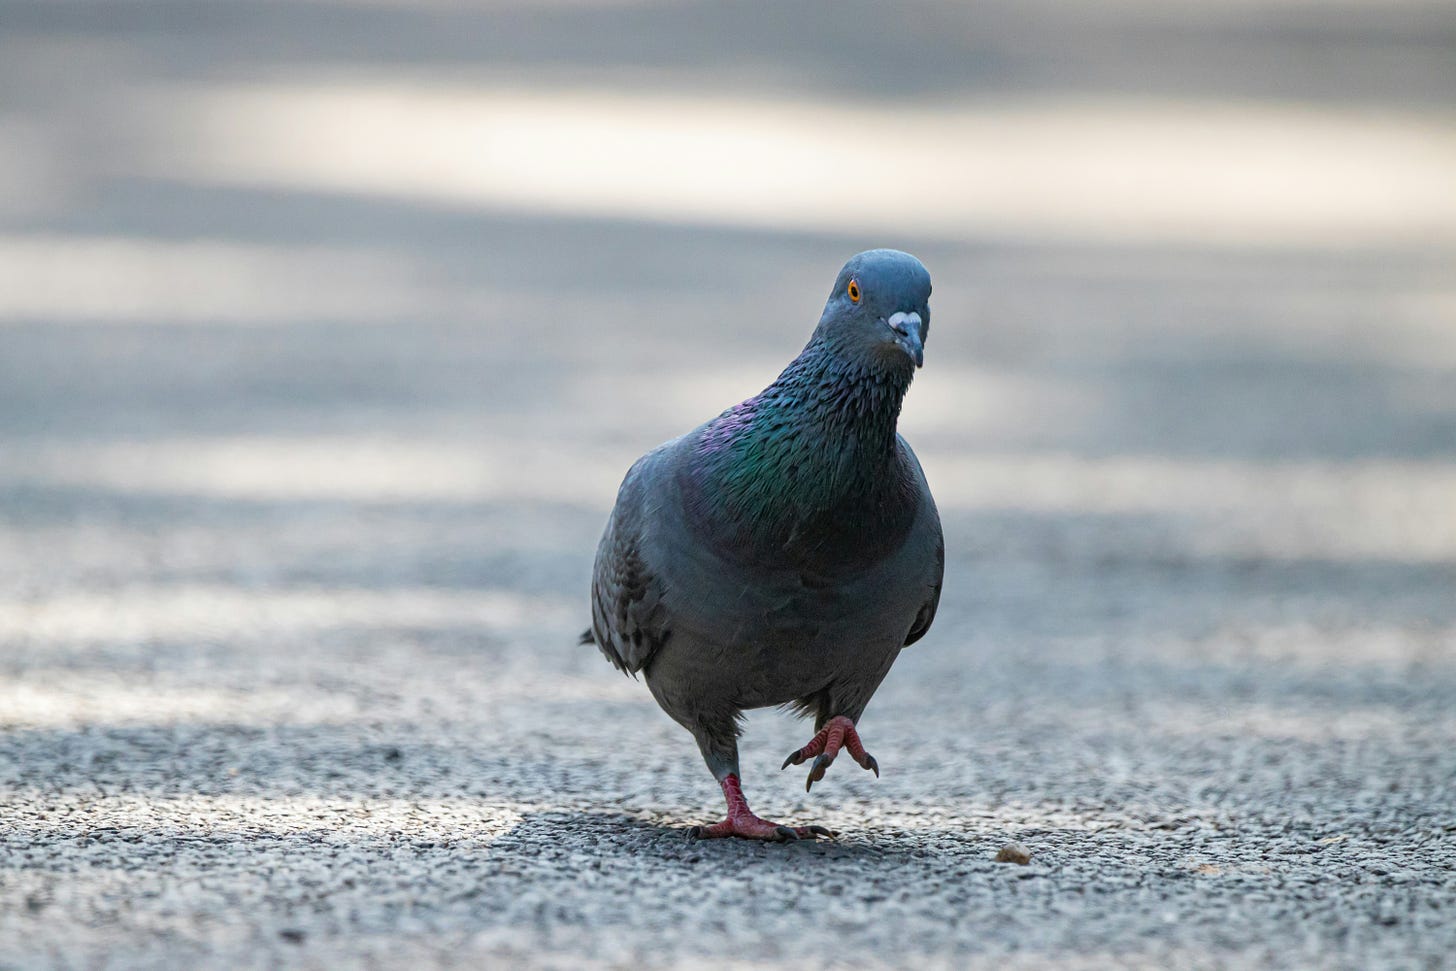 A pigeon with iridescent neck feathers taking a tentative step on a paved surface